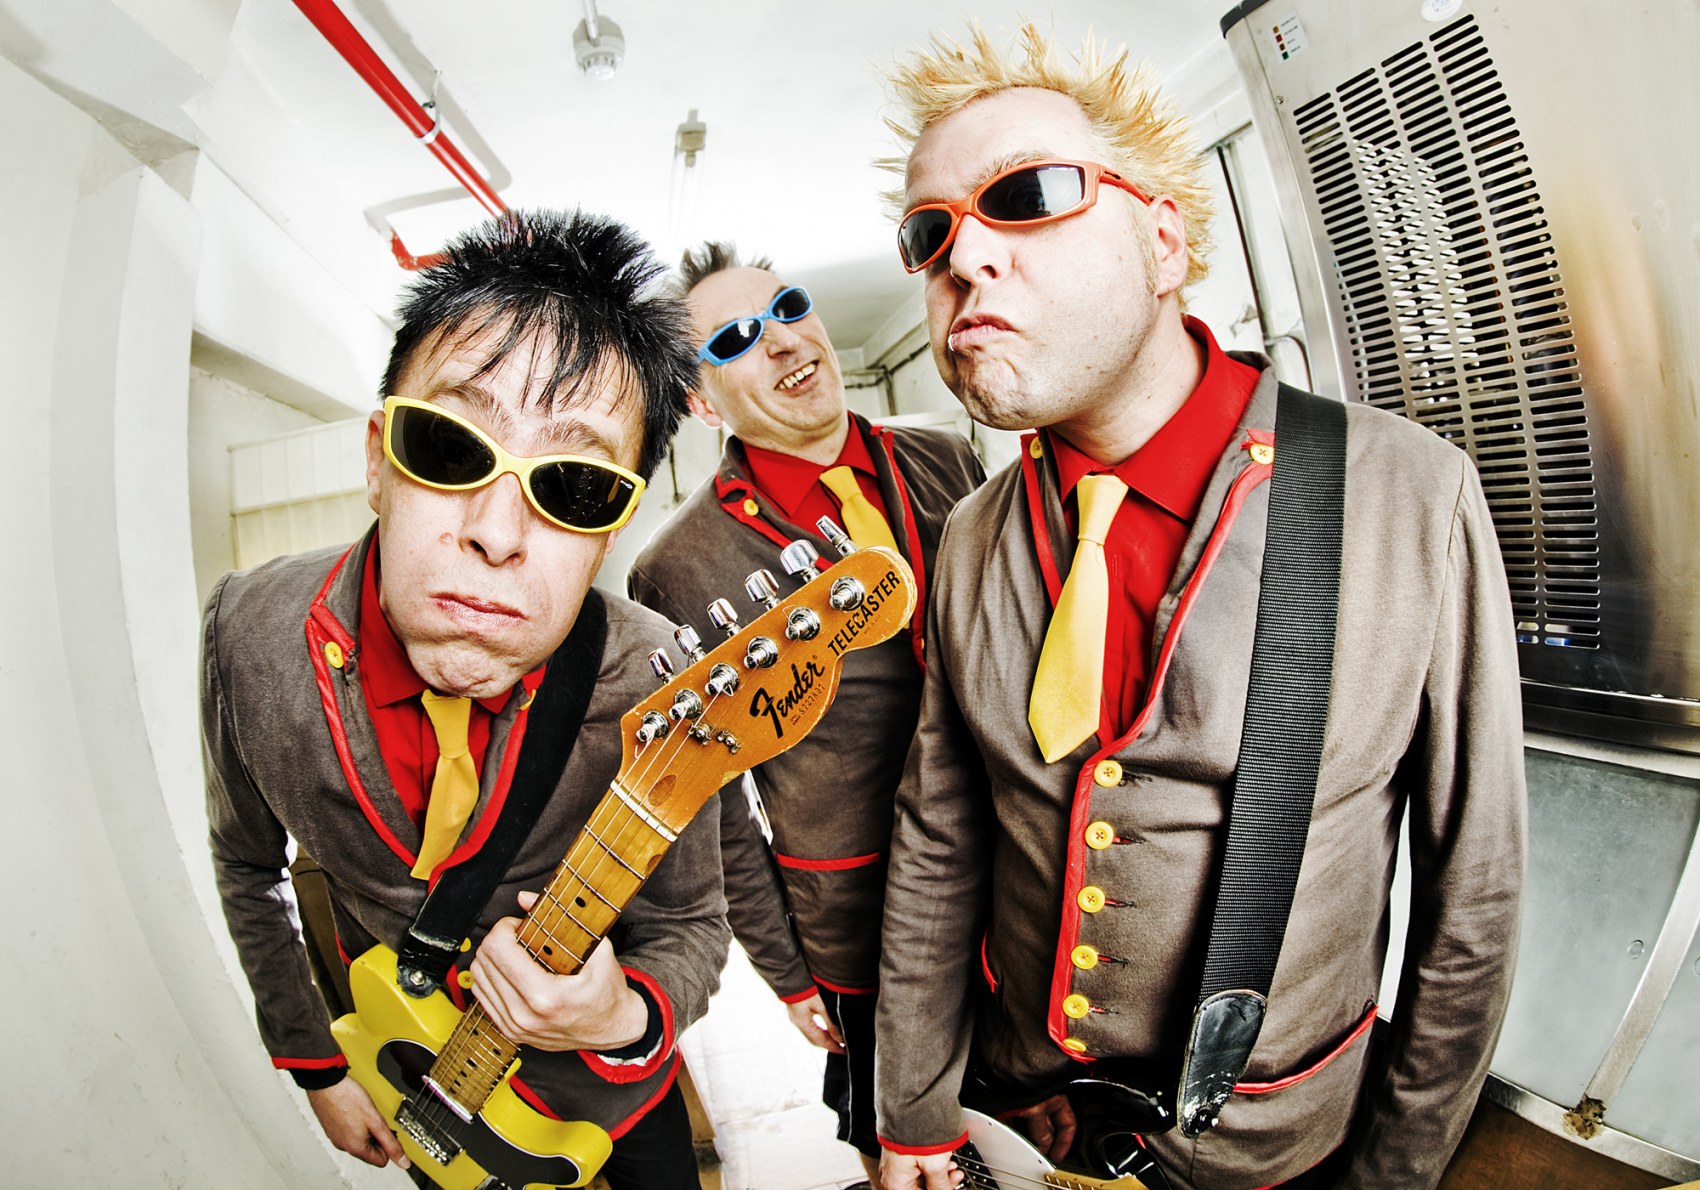 The Toy Dolls + The Kids + Funeral Dress + Vice Squad + Sham 69 + ...